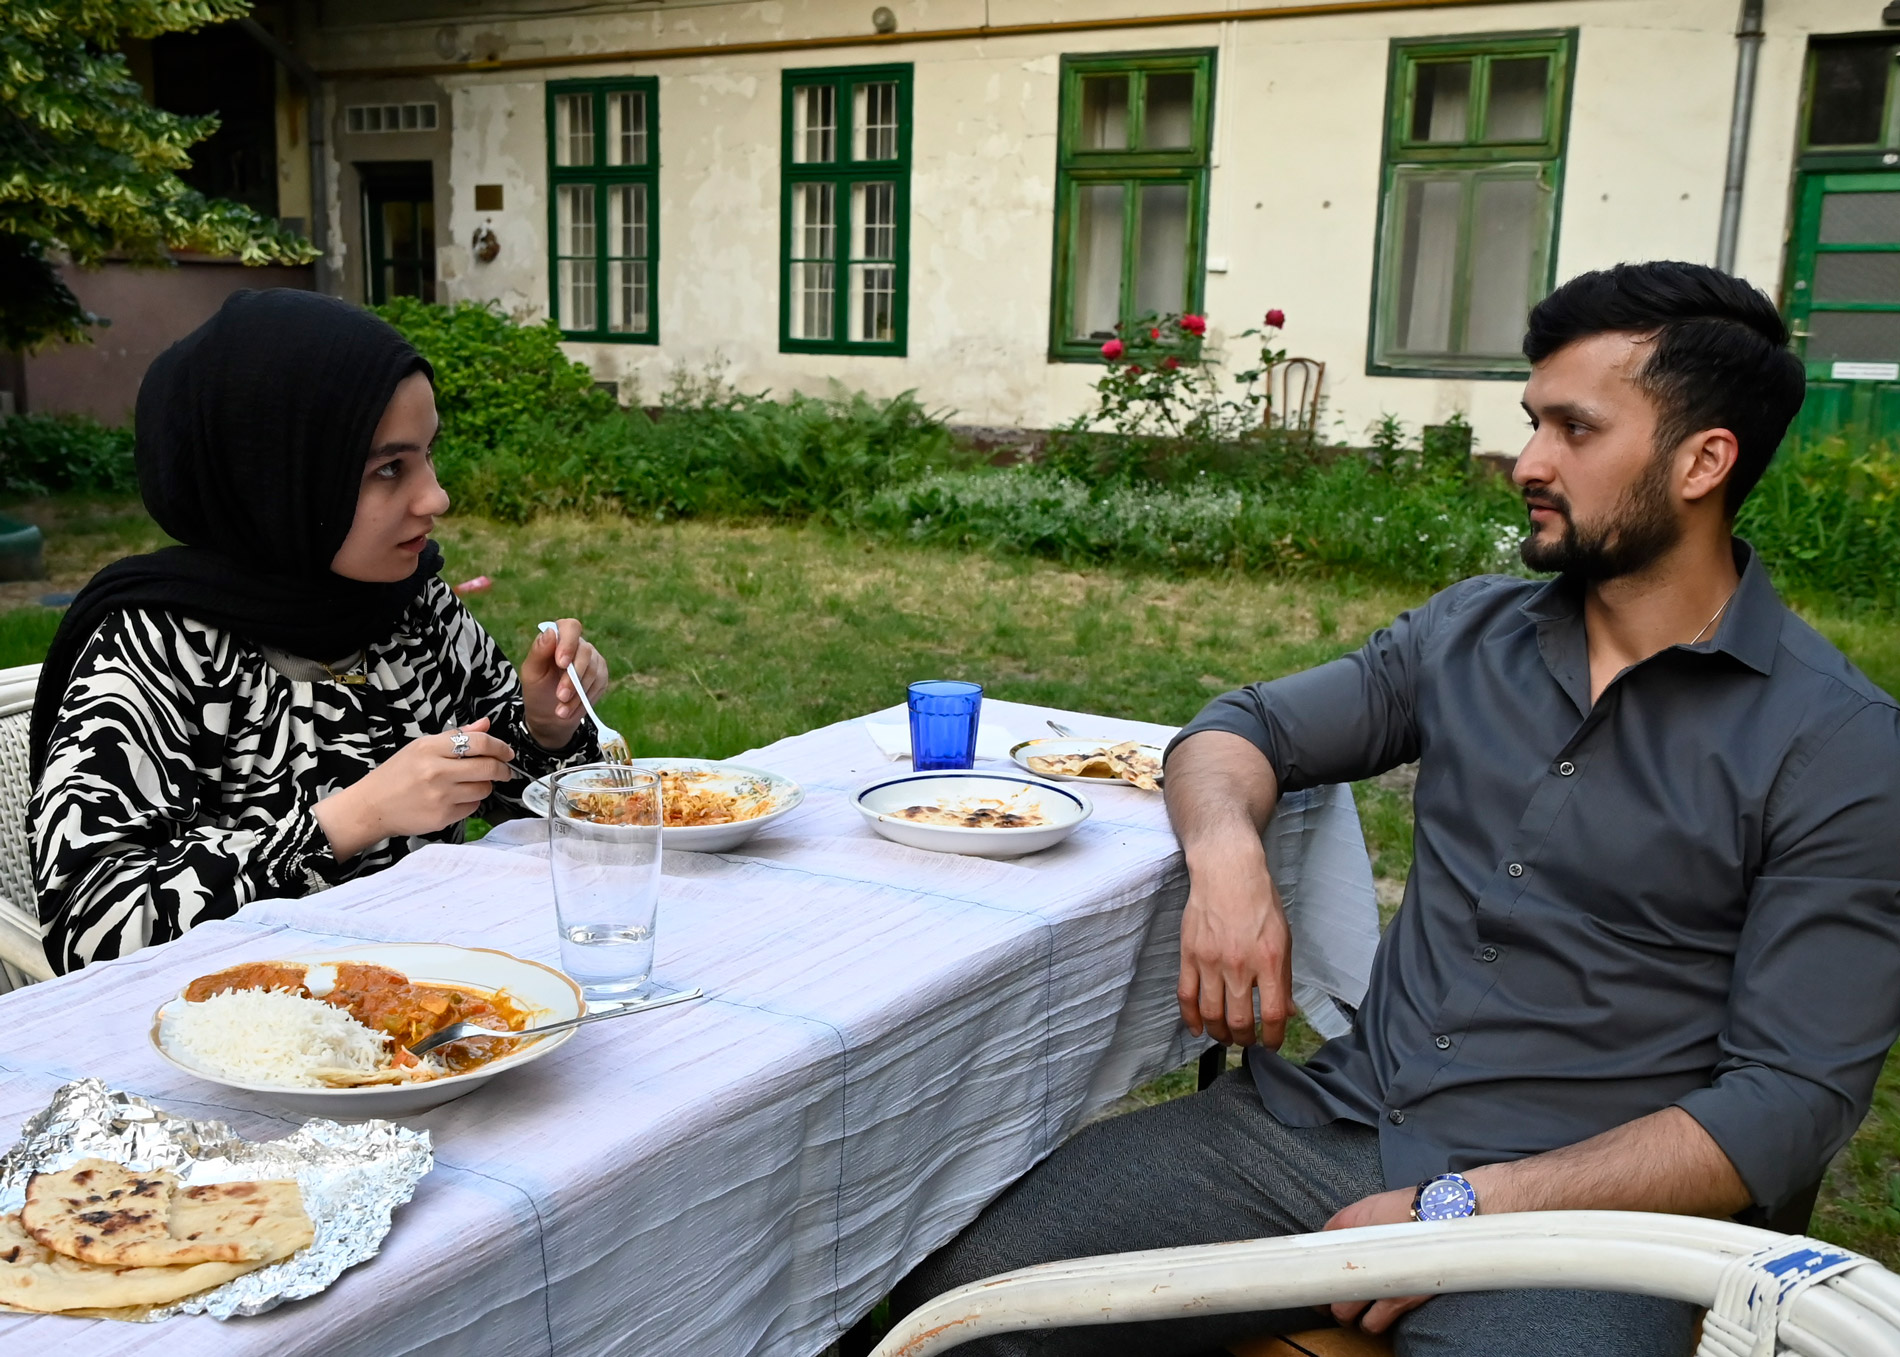 A young man and woman are having a conversation at the dinner table outside.